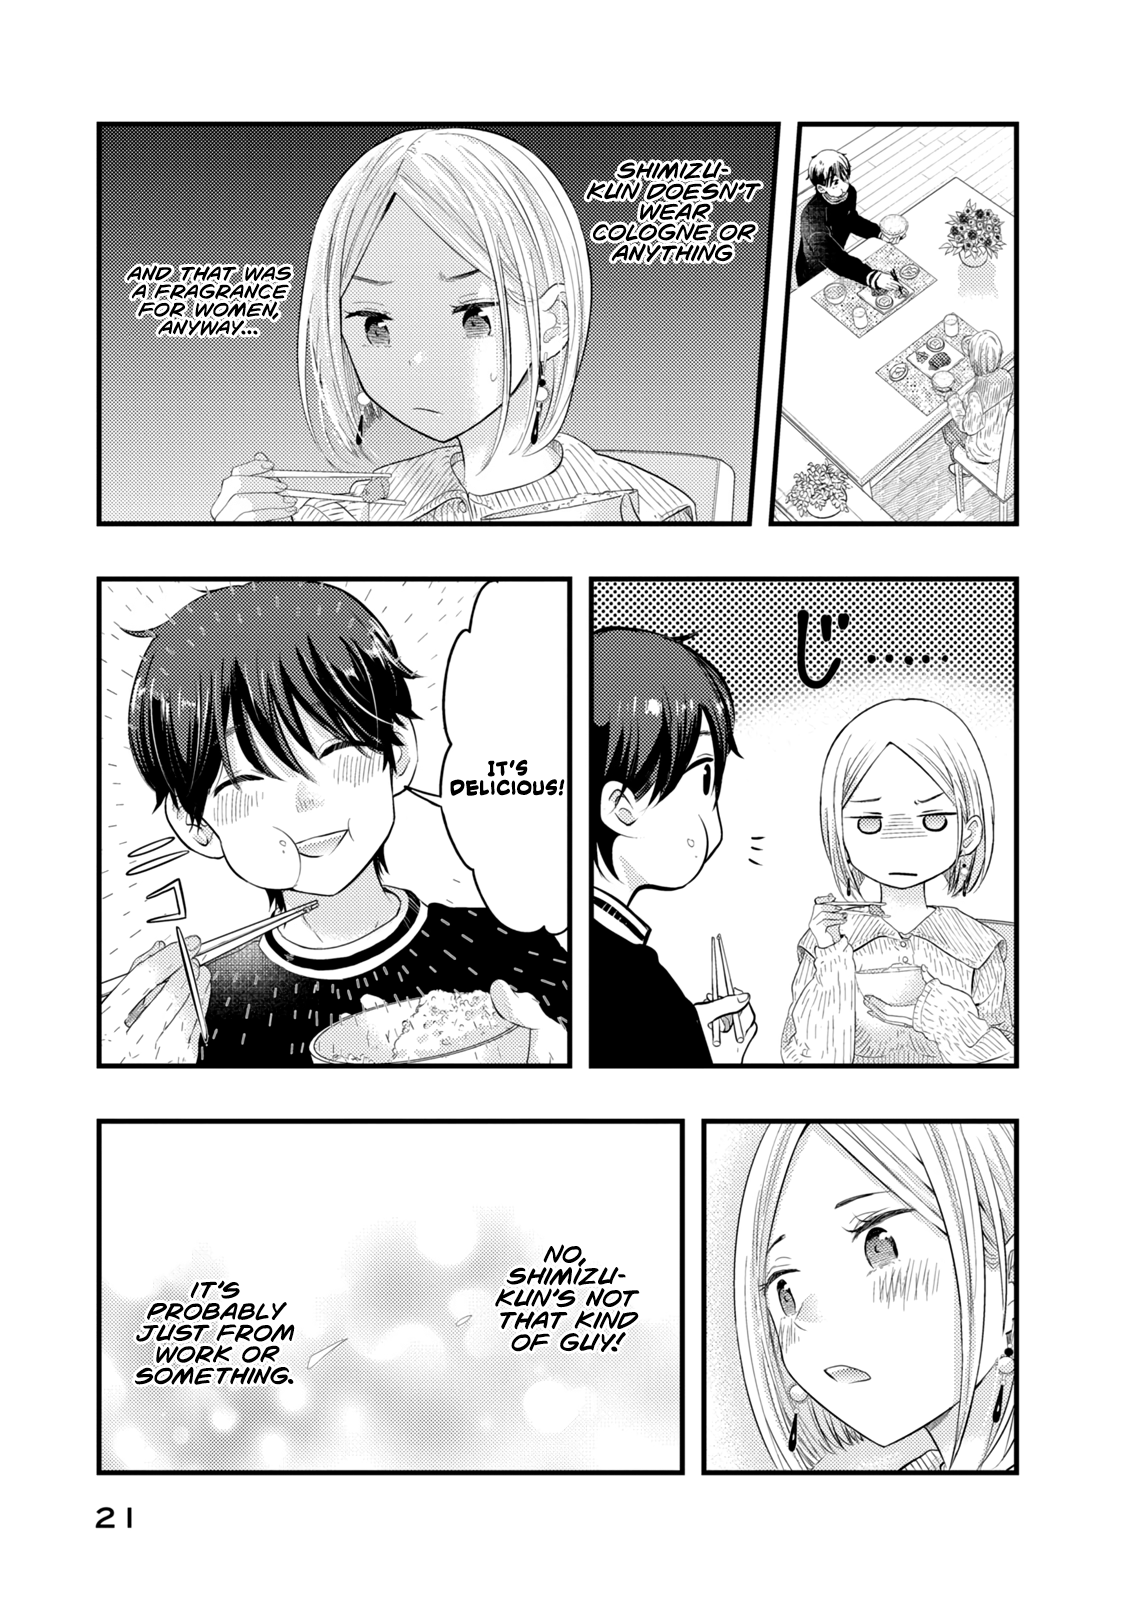 My Wife Is A Little Scary (Serialization) Vol.3 Chapter 18: You're Acting Too Suspicious, Shimizu-Kun - Picture 3